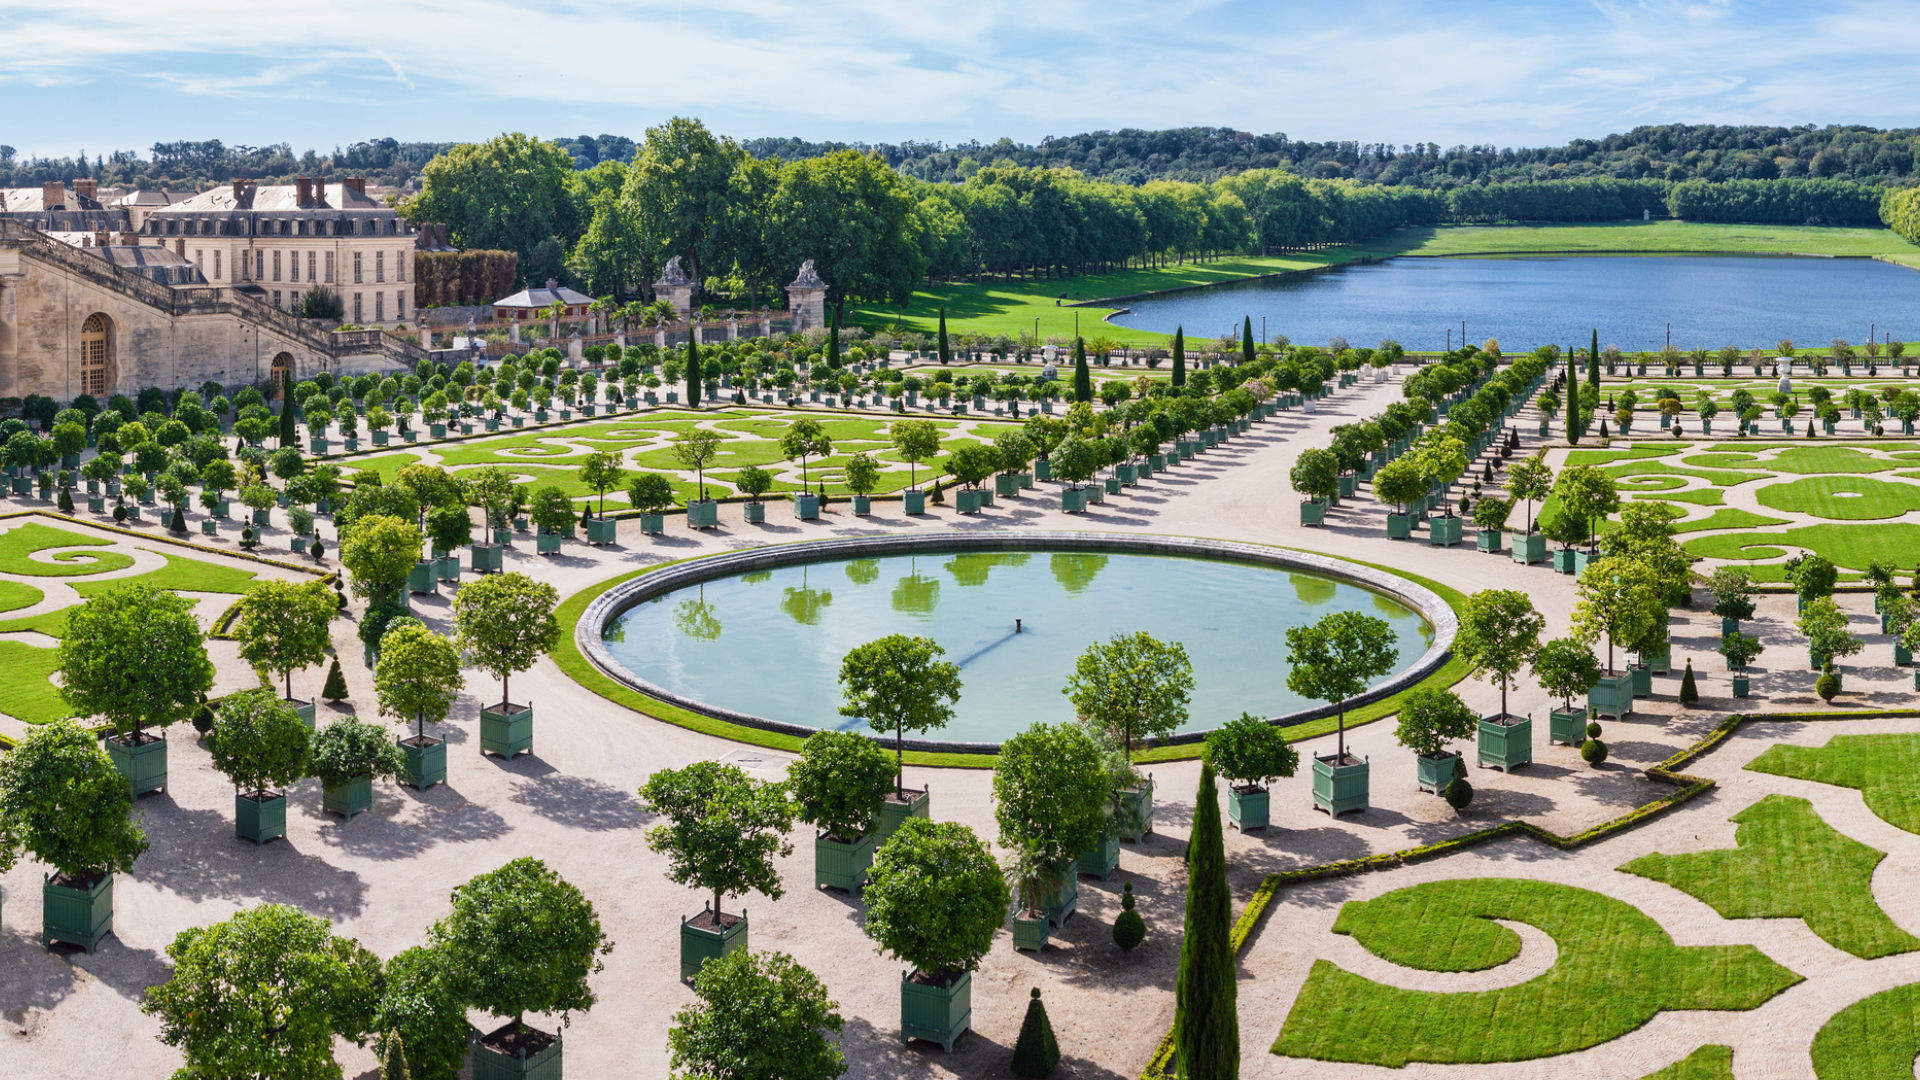 4 French gardens to discover